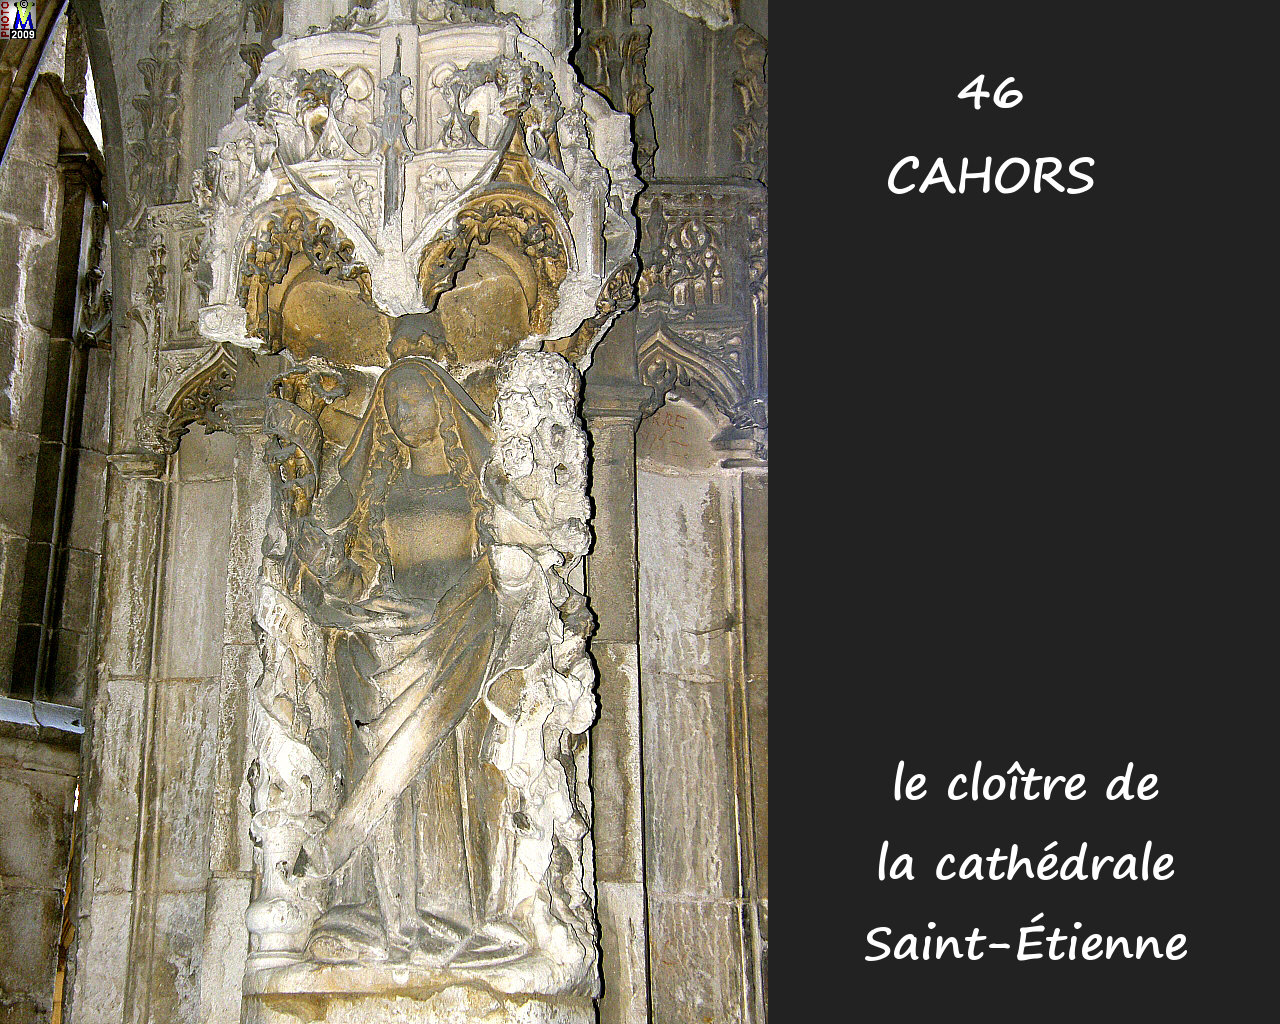 46CAHORS_cathedrale_330.jpg